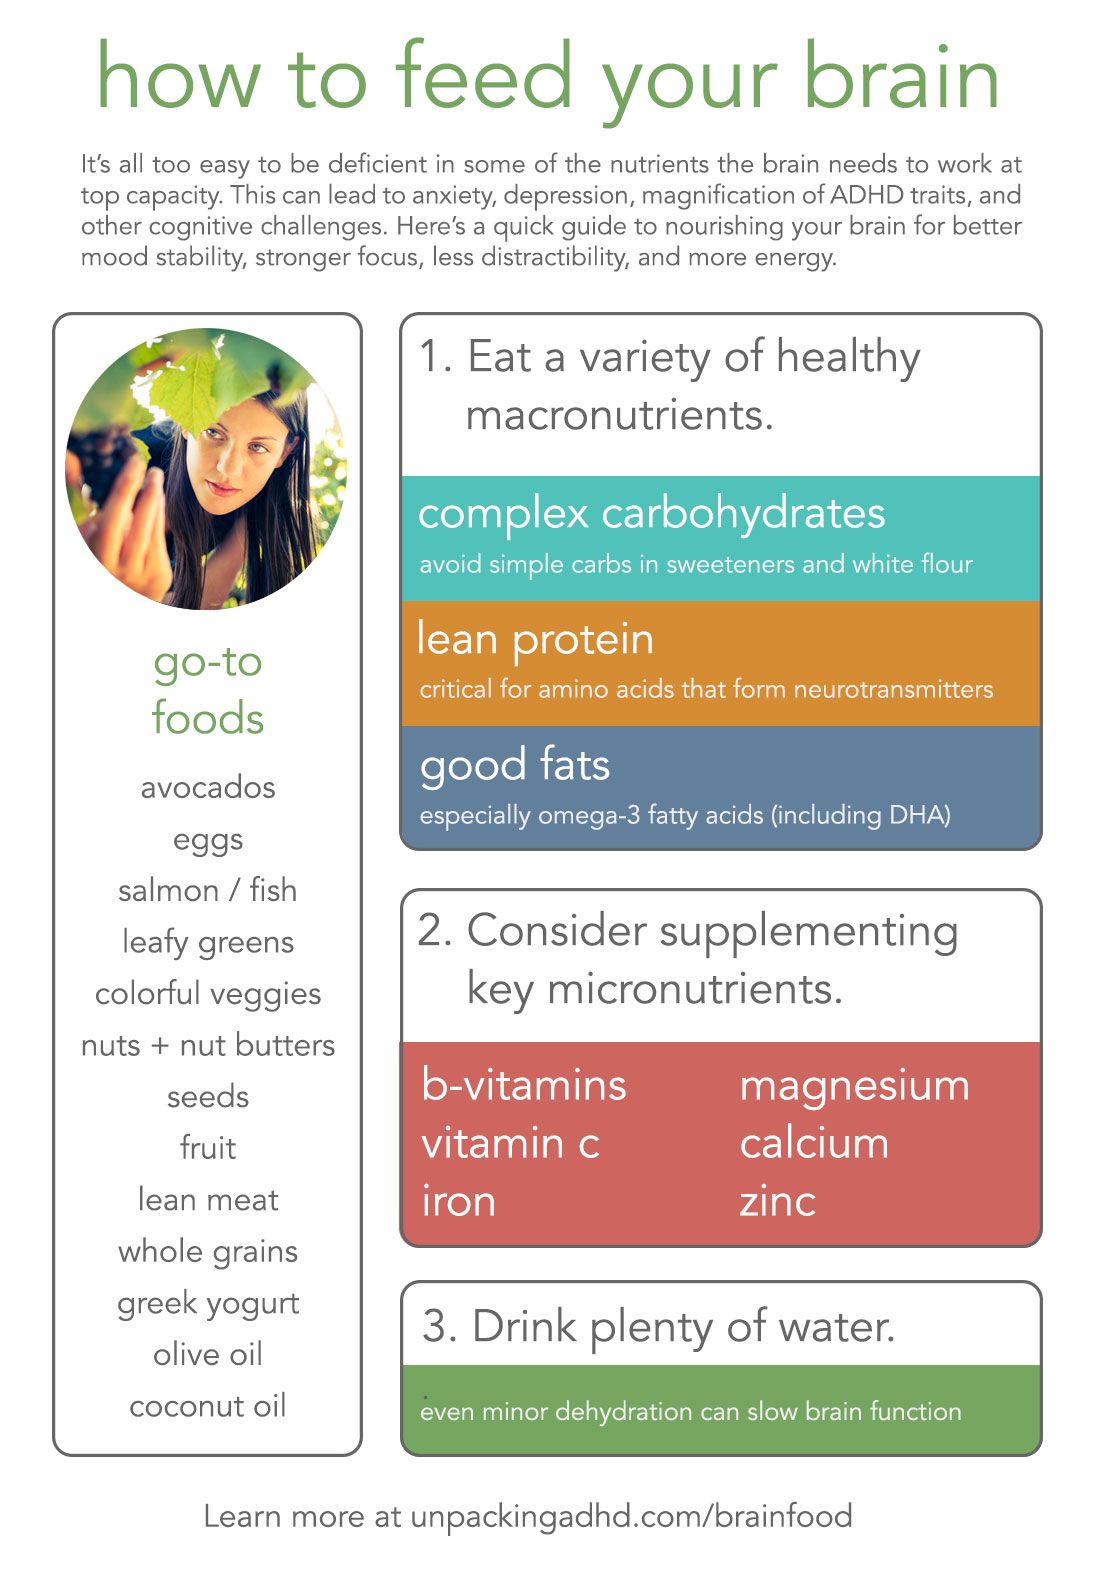 ADHD Brain Food - New Ebook and Free Infographic